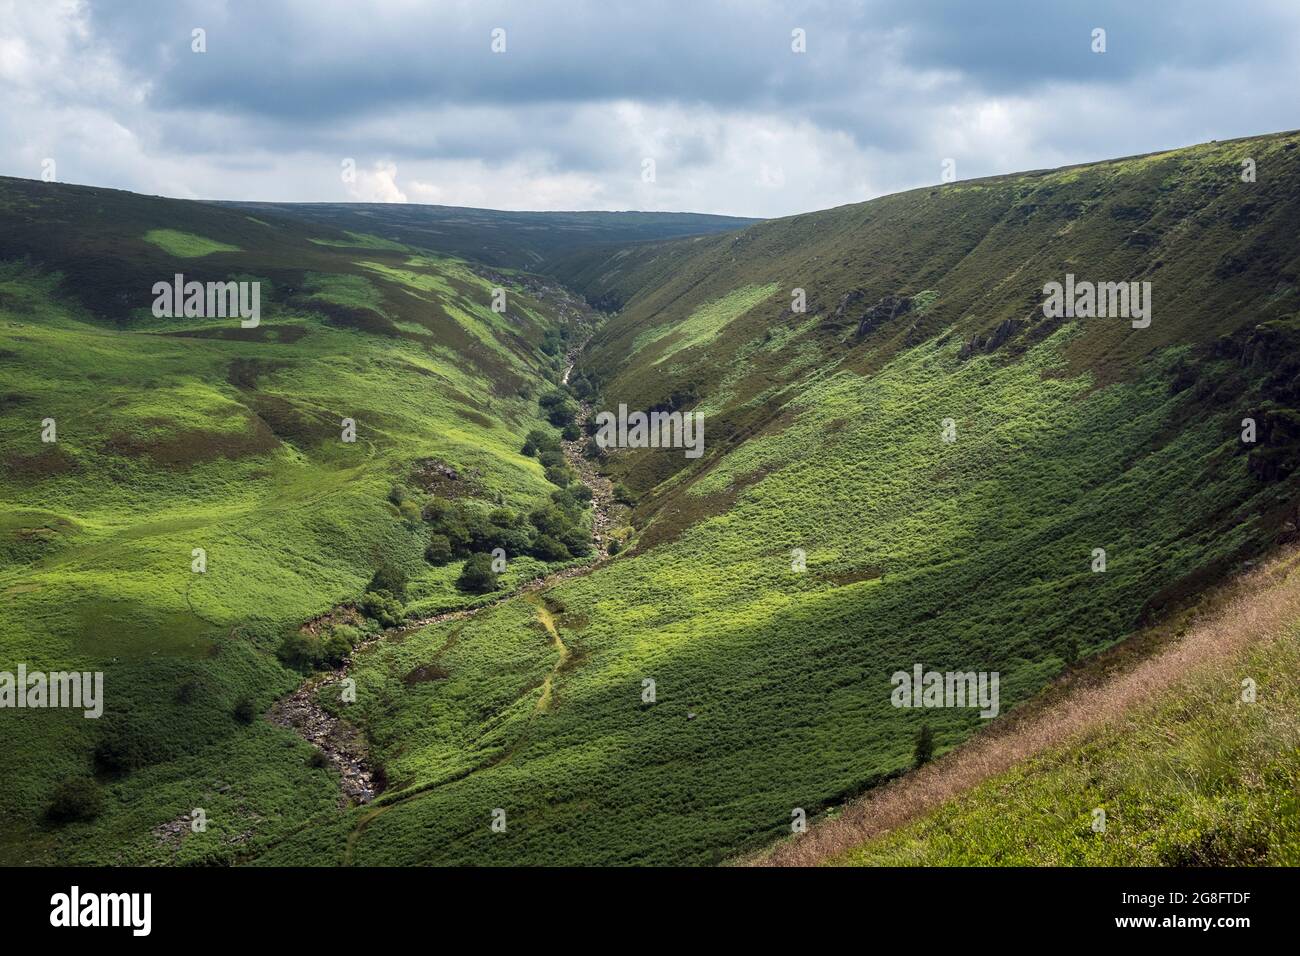 View of Torside Clough from the Pennine Way looking towards Bleaklow Head from the Pennine Way, Peak District National Park, Derbyshire Stock Photo